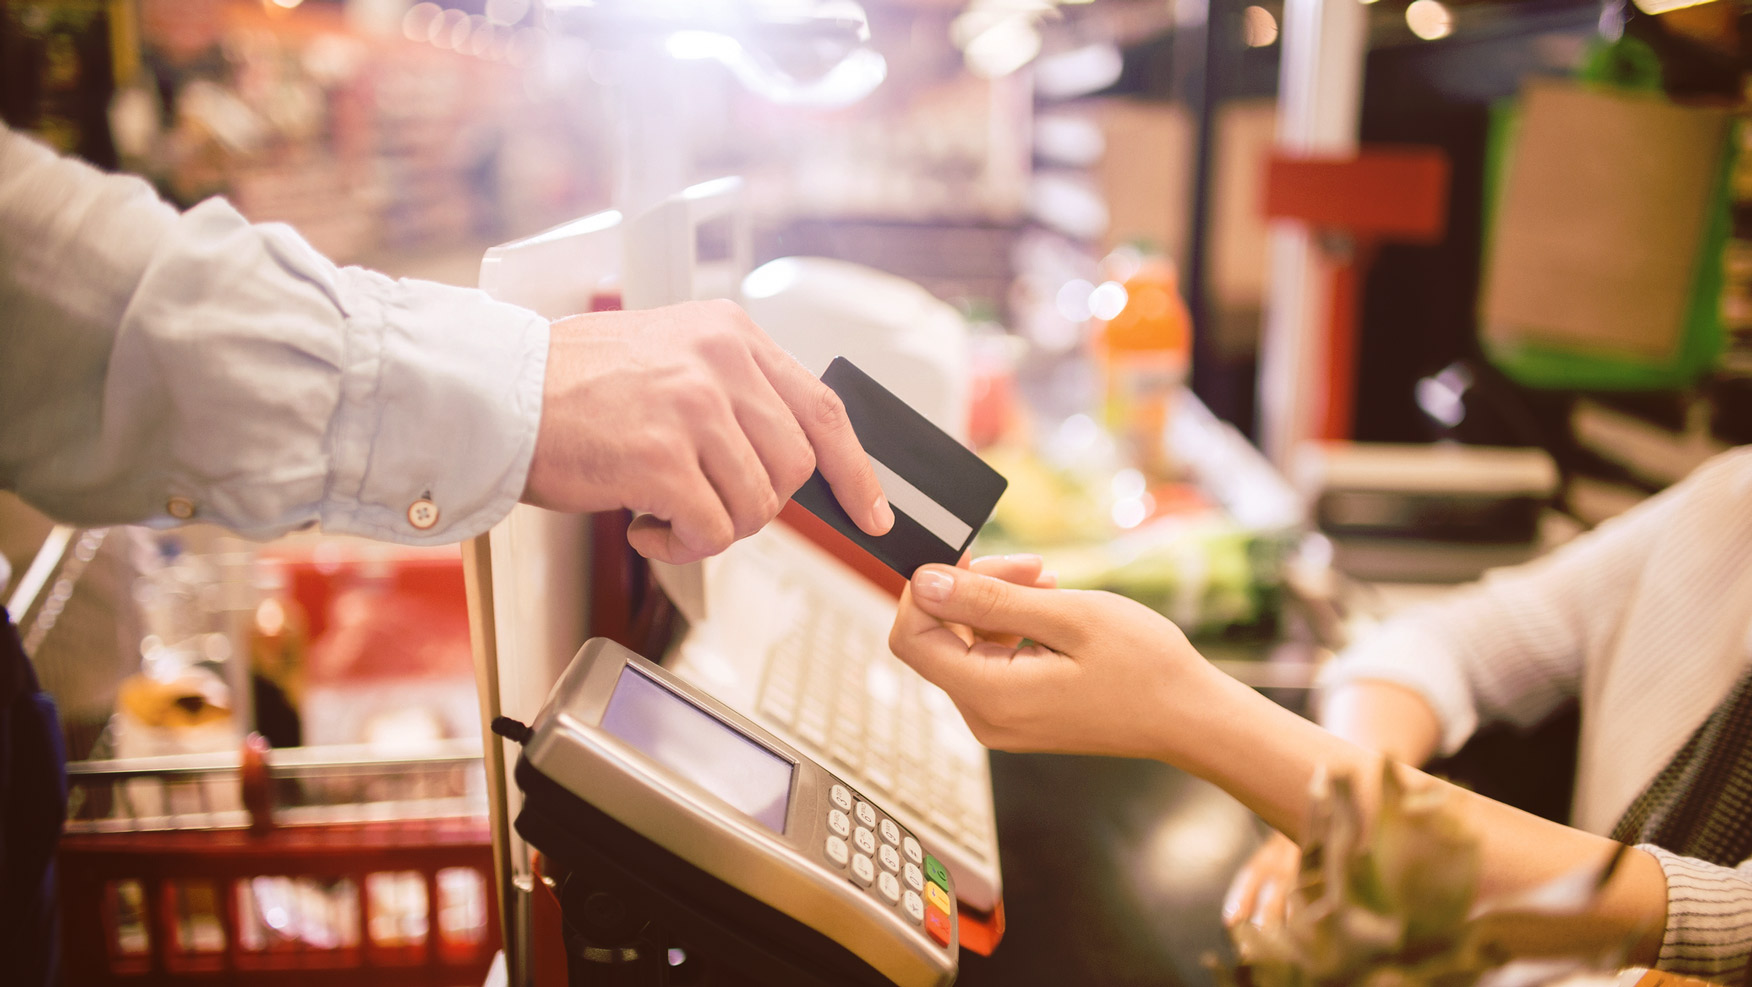 A grocery shopper hands a credit card to a grocery store cashier